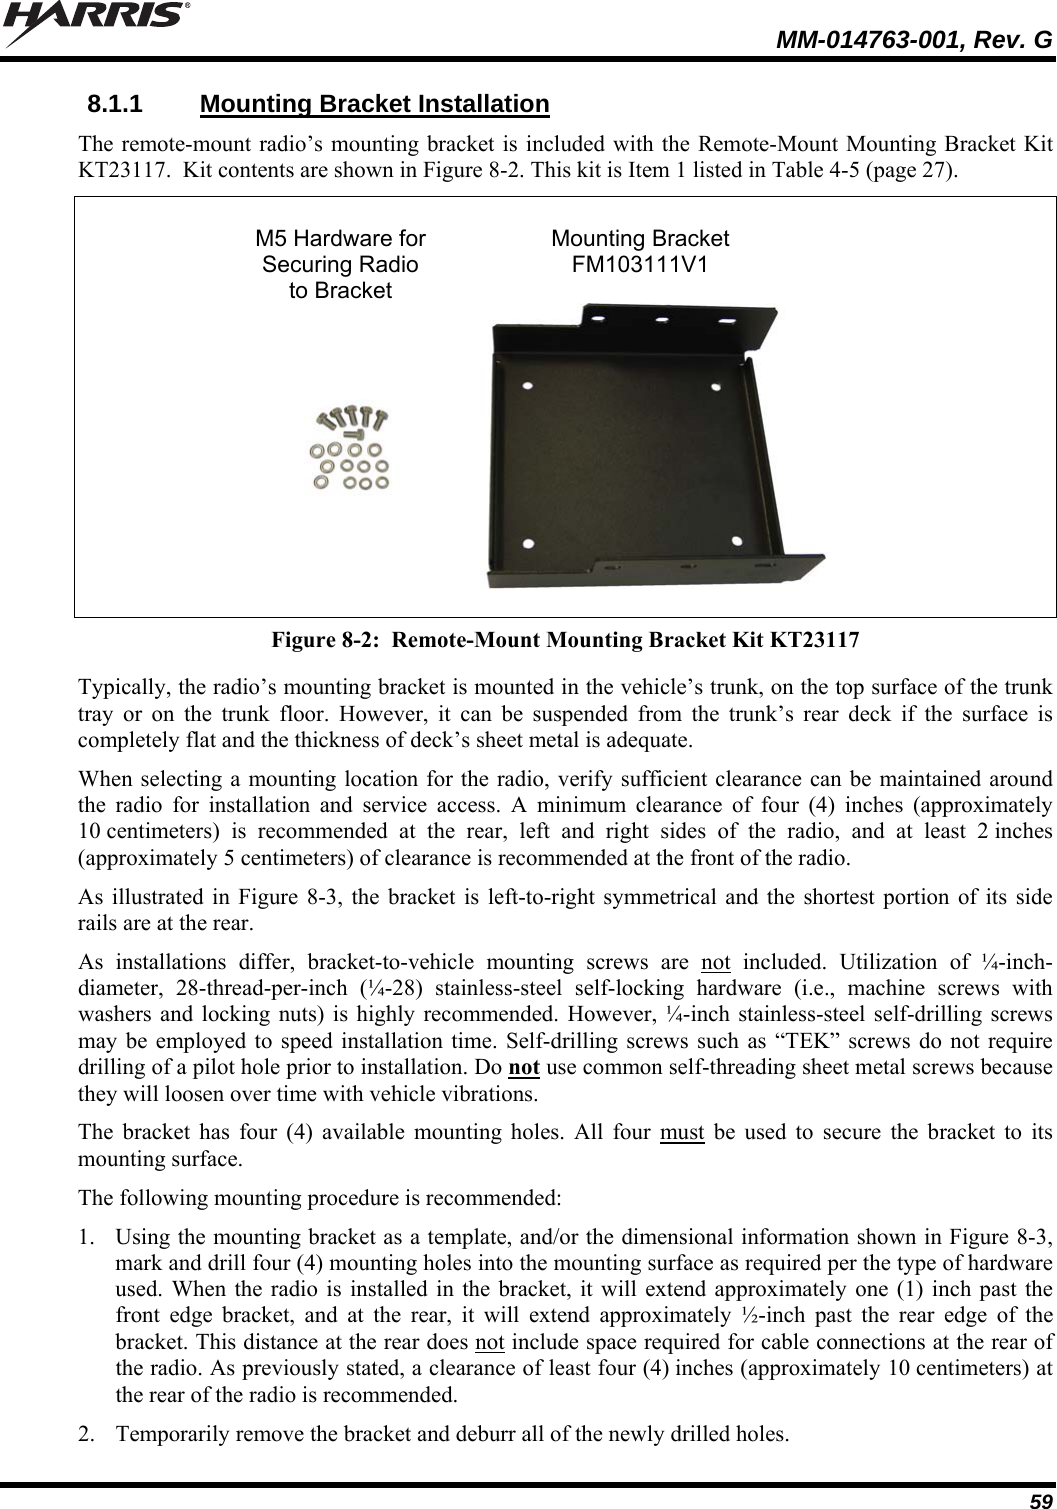   MM-014763-001, Rev. G 59 8.1.1  Mounting Bracket Installation The remote-mount radio’s mounting bracket is included with the Remote-Mount Mounting Bracket Kit KT23117.  Kit contents are shown in Figure 8-2. This kit is Item 1 listed in Table 4-5 (page 27).    M5 Hardware for  Mounting Bracket  Securing Radio FM103111V1  to Bracket     Figure 8-2:  Remote-Mount Mounting Bracket Kit KT23117 Typically, the radio’s mounting bracket is mounted in the vehicle’s trunk, on the top surface of the trunk tray or on the trunk floor. However, it can be suspended from the trunk’s rear deck if the surface is completely flat and the thickness of deck’s sheet metal is adequate. When selecting a mounting location for the radio, verify sufficient clearance can be maintained around the radio for installation and service access. A minimum clearance of four (4) inches (approximately 10 centimeters) is recommended at the rear, left and right sides of the radio, and at least 2 inches (approximately 5 centimeters) of clearance is recommended at the front of the radio. As illustrated in Figure 8-3, the bracket is left-to-right symmetrical and the shortest portion of its side rails are at the rear. As installations differ, bracket-to-vehicle mounting screws are not included. Utilization of ¼-inch-diameter, 28-thread-per-inch (¼-28) stainless-steel self-locking hardware (i.e., machine screws with washers and locking nuts) is highly recommended. However, ¼-inch stainless-steel self-drilling screws may be employed to speed installation time. Self-drilling screws such as “TEK” screws do not require drilling of a pilot hole prior to installation. Do not use common self-threading sheet metal screws because they will loosen over time with vehicle vibrations. The bracket has four (4) available mounting holes. All four must be used to secure the bracket to its mounting surface. The following mounting procedure is recommended: 1. Using the mounting bracket as a template, and/or the dimensional information shown in Figure 8-3, mark and drill four (4) mounting holes into the mounting surface as required per the type of hardware used. When the radio is installed in the bracket, it will extend approximately one (1) inch past the front edge bracket, and at the rear, it will extend approximately ½-inch past the rear edge of the bracket. This distance at the rear does not include space required for cable connections at the rear of the radio. As previously stated, a clearance of least four (4) inches (approximately 10 centimeters) at the rear of the radio is recommended. 2. Temporarily remove the bracket and deburr all of the newly drilled holes. 